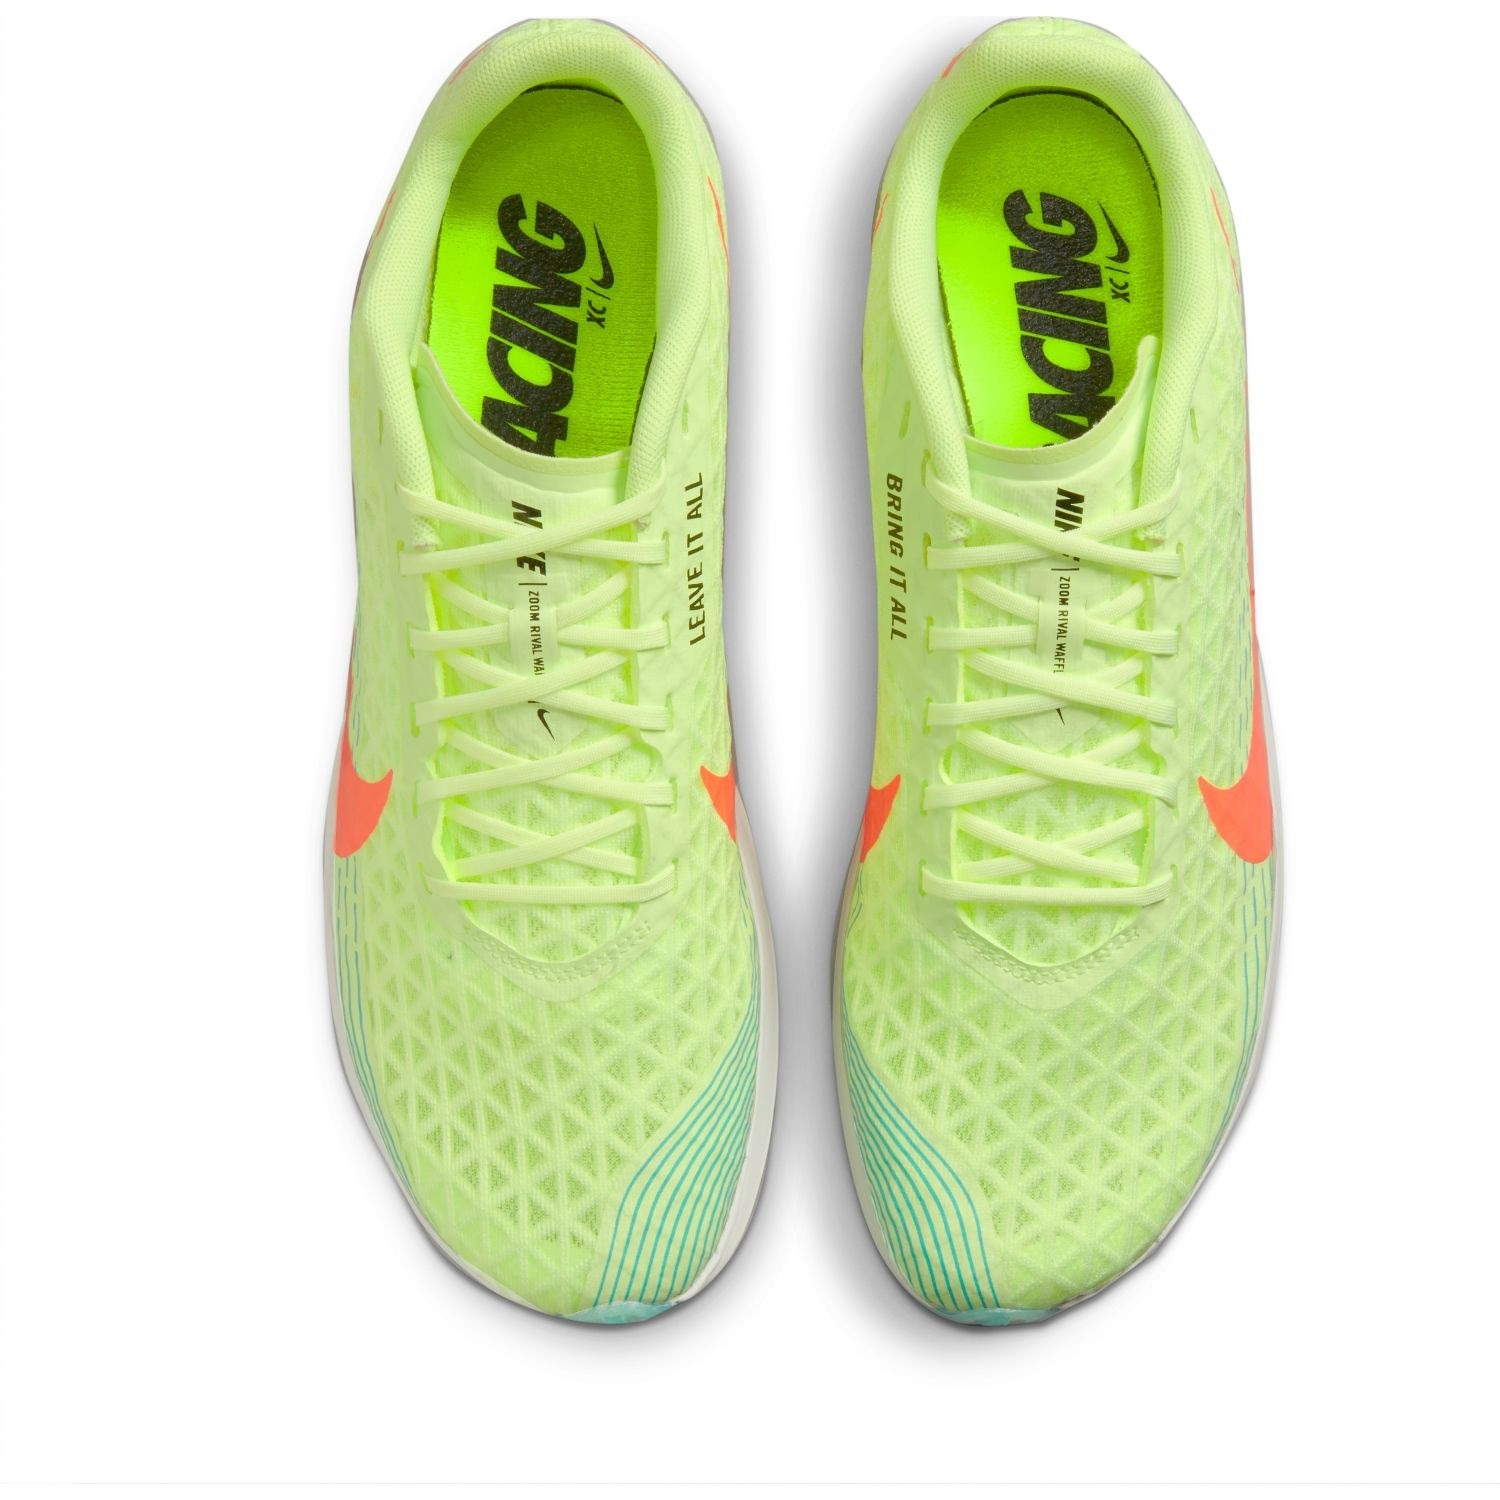 Nike Zoom Rival Waffle 5 - Unisex Racing Waffles - Barely Volt/Hyper ...